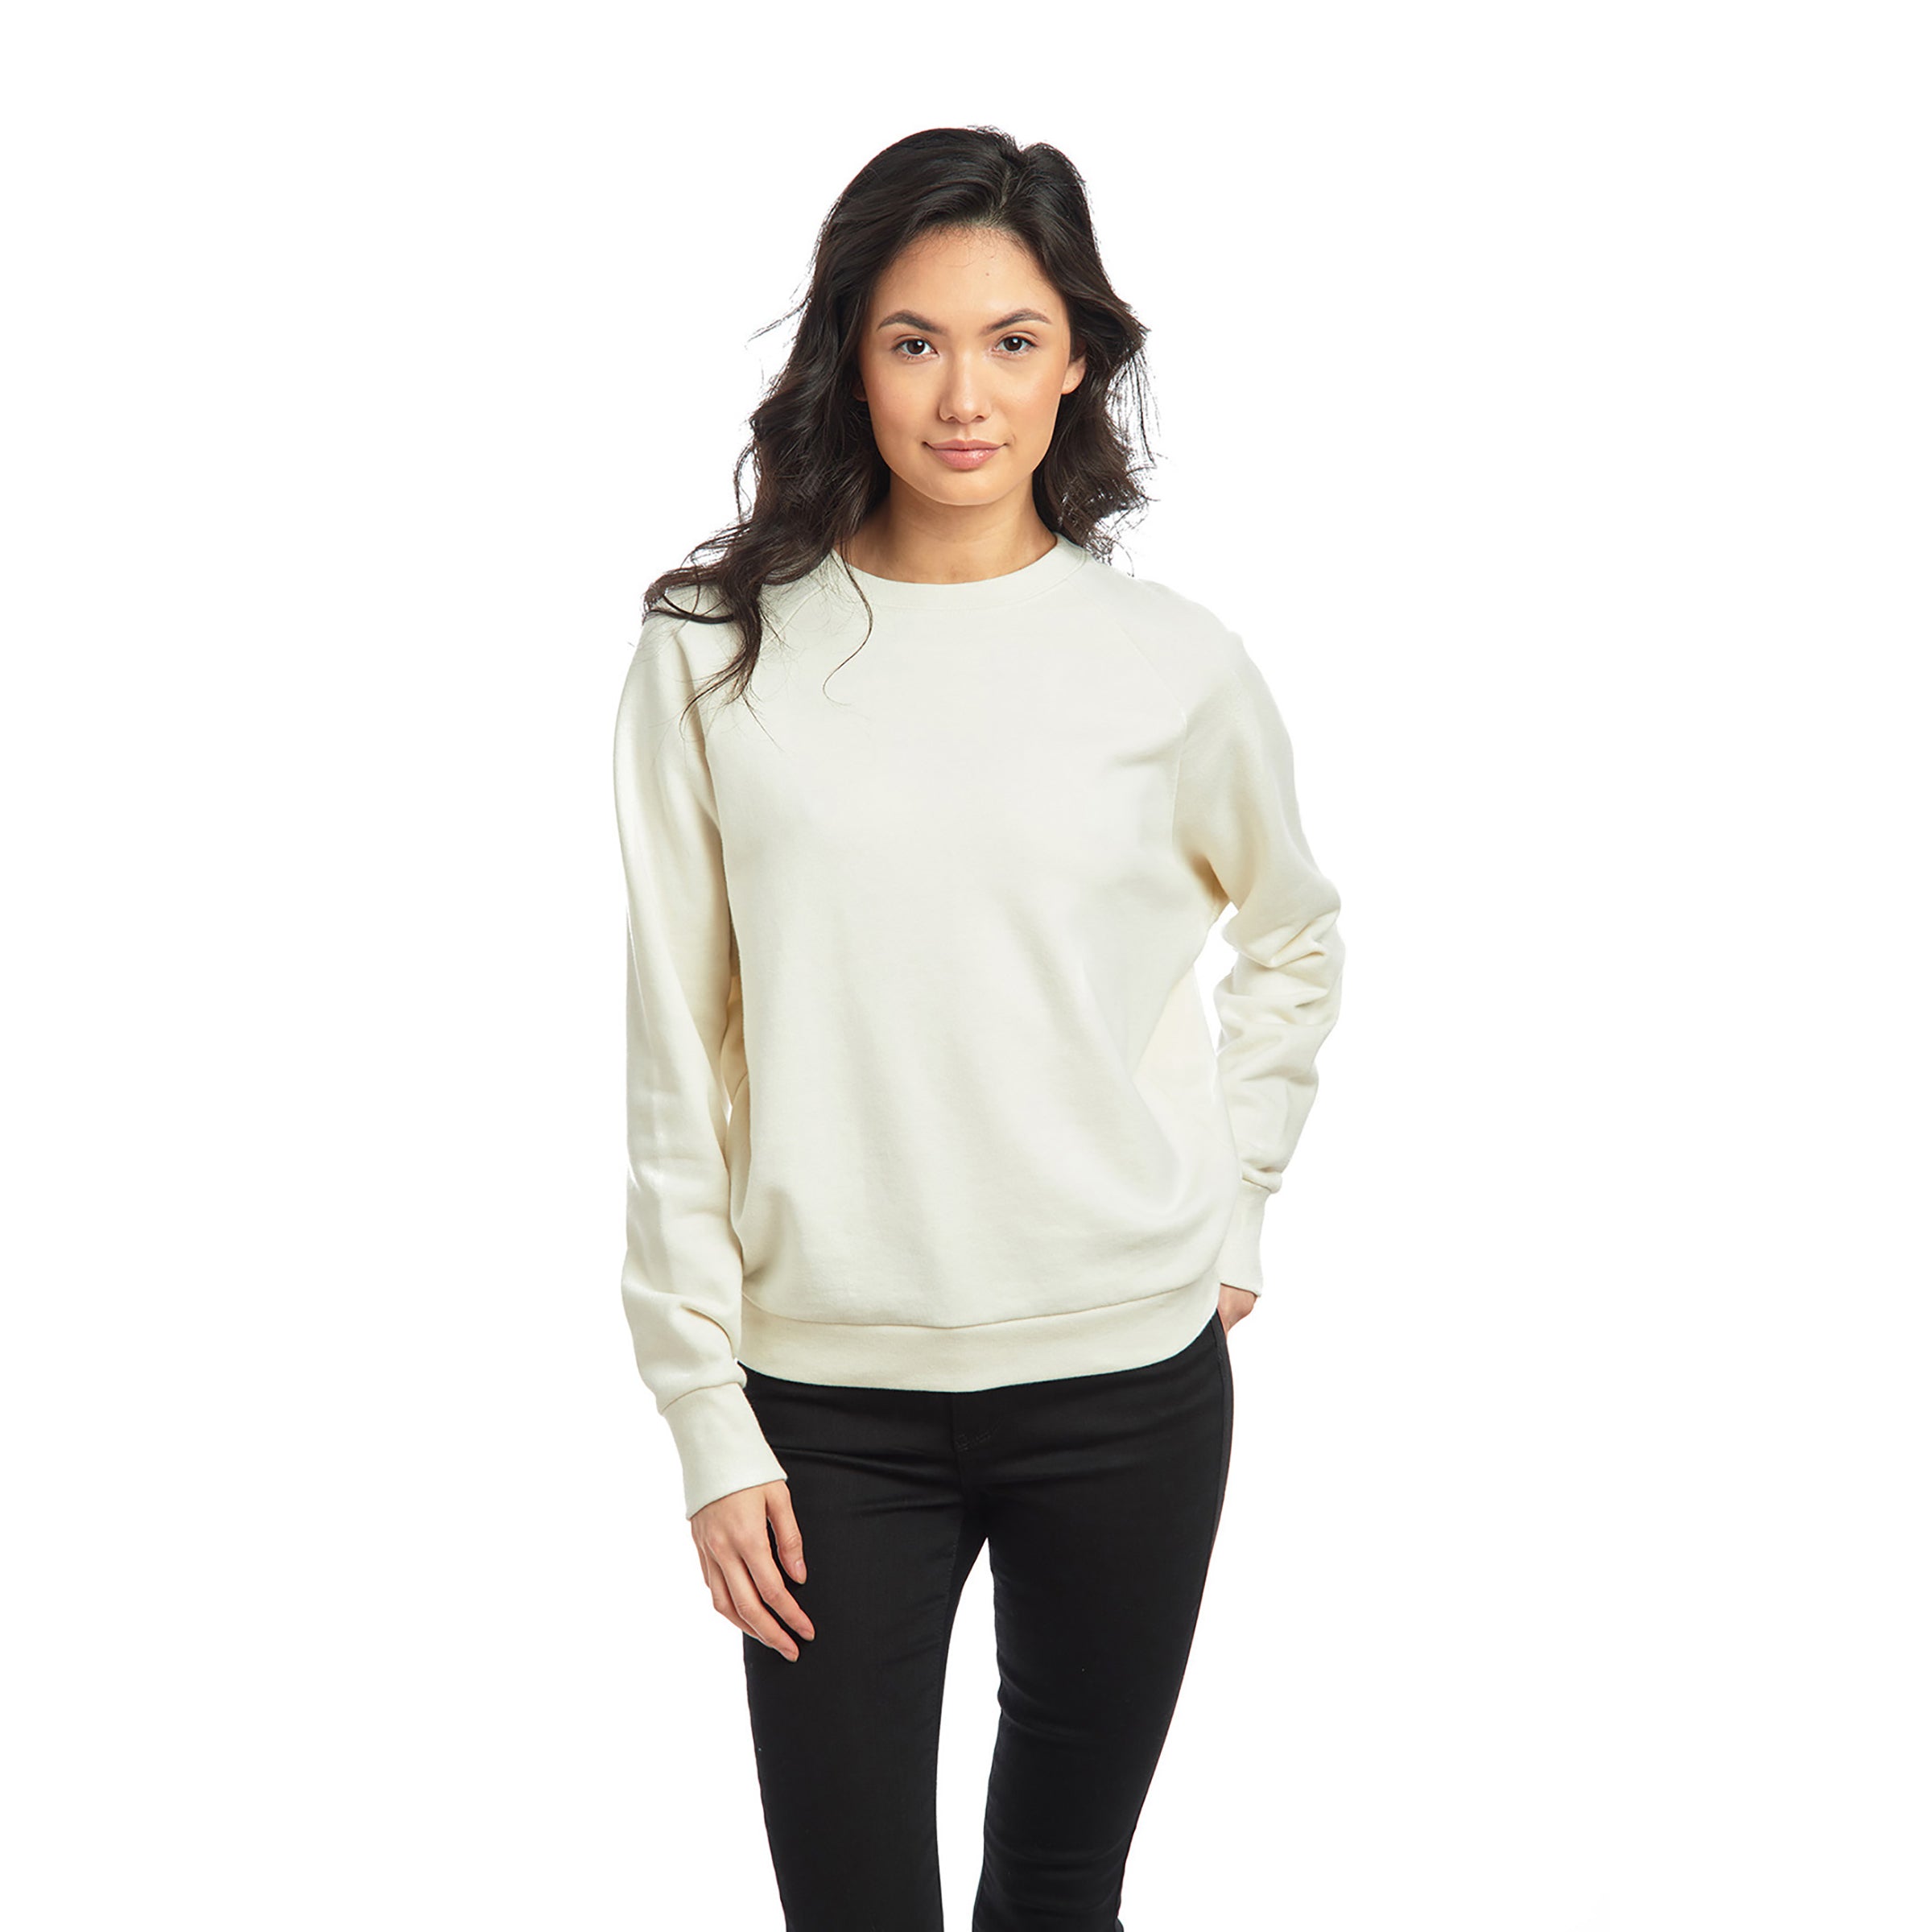 Women wearing Vintage White The French Terry Sweatshirt Surf